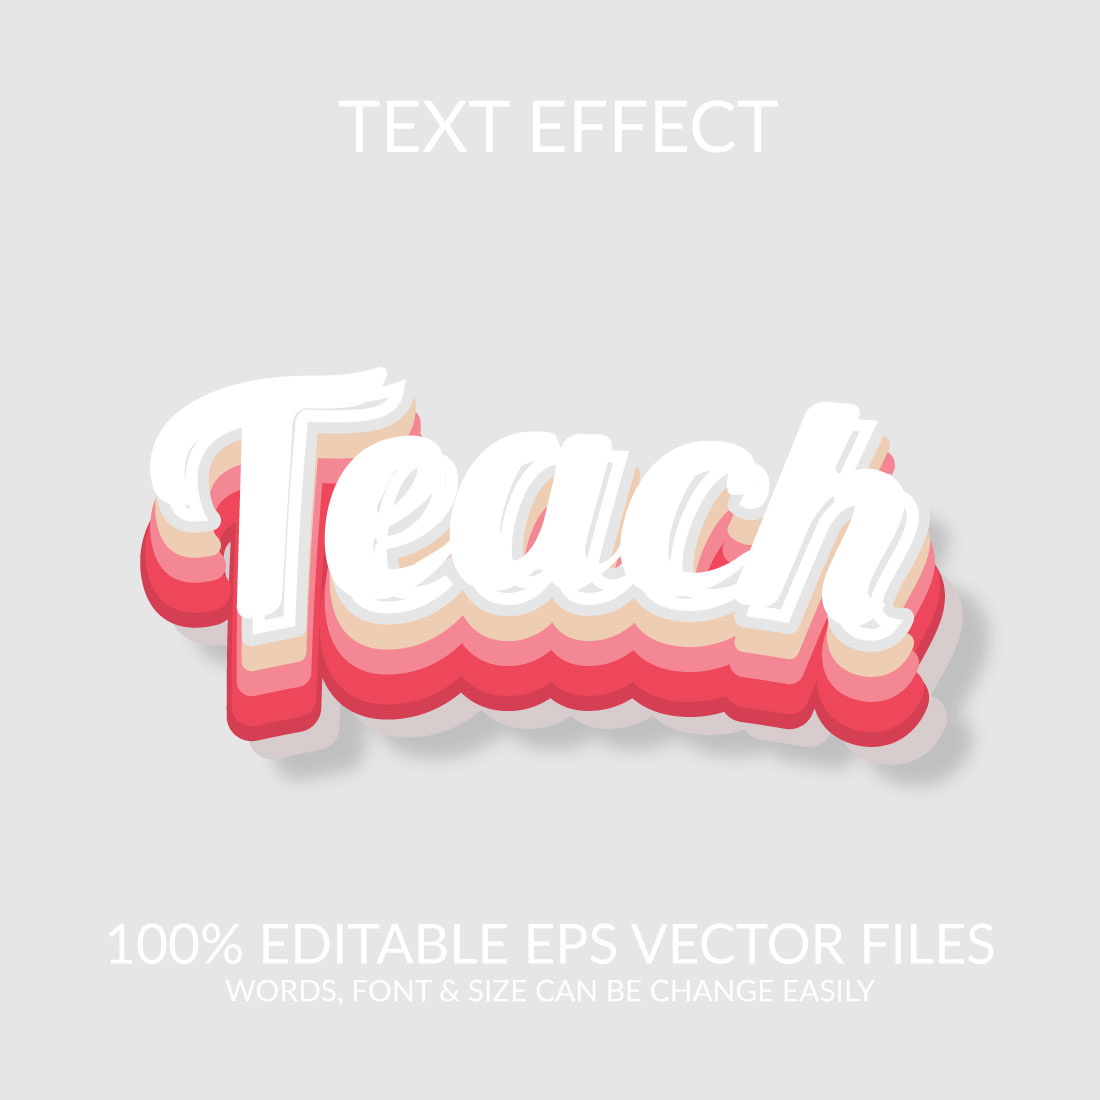 Teach 3d text effect template preview image.